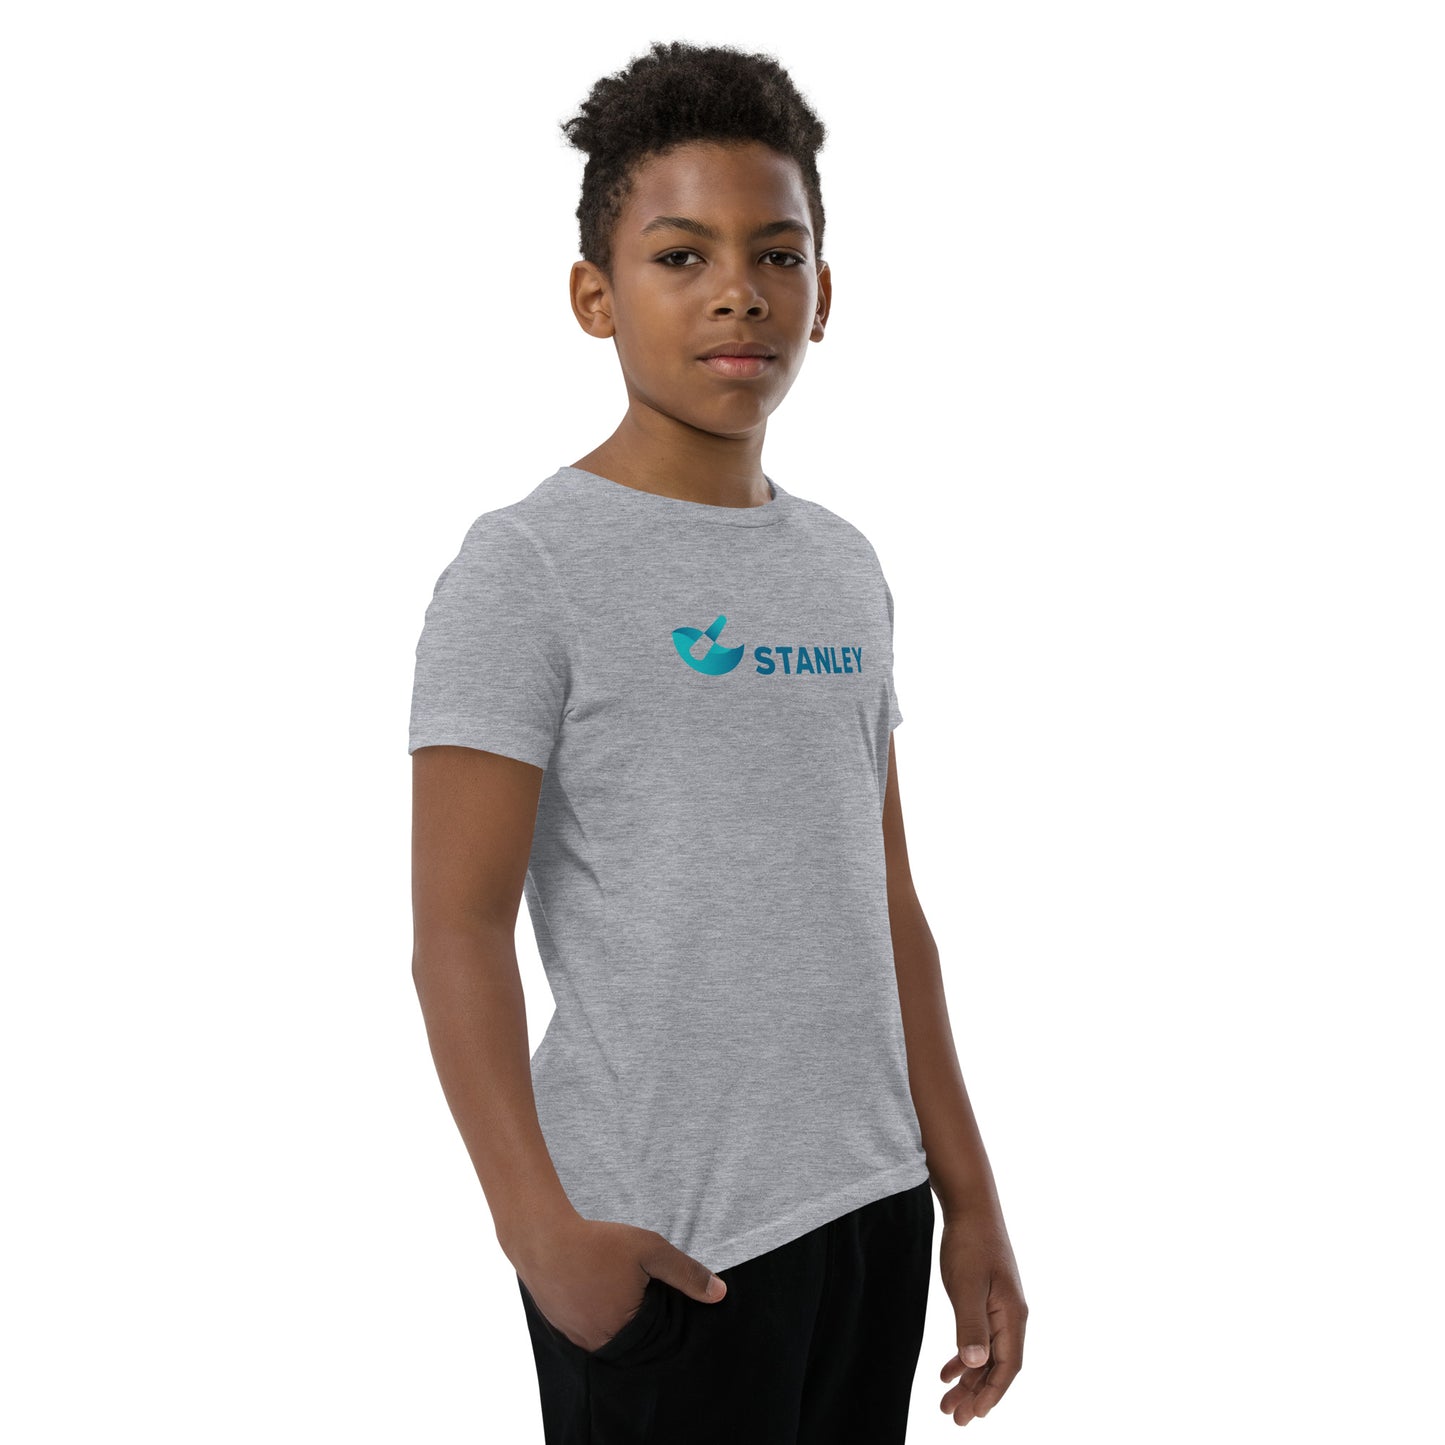 Youth Short Sleeve T-Shirt - Stanley